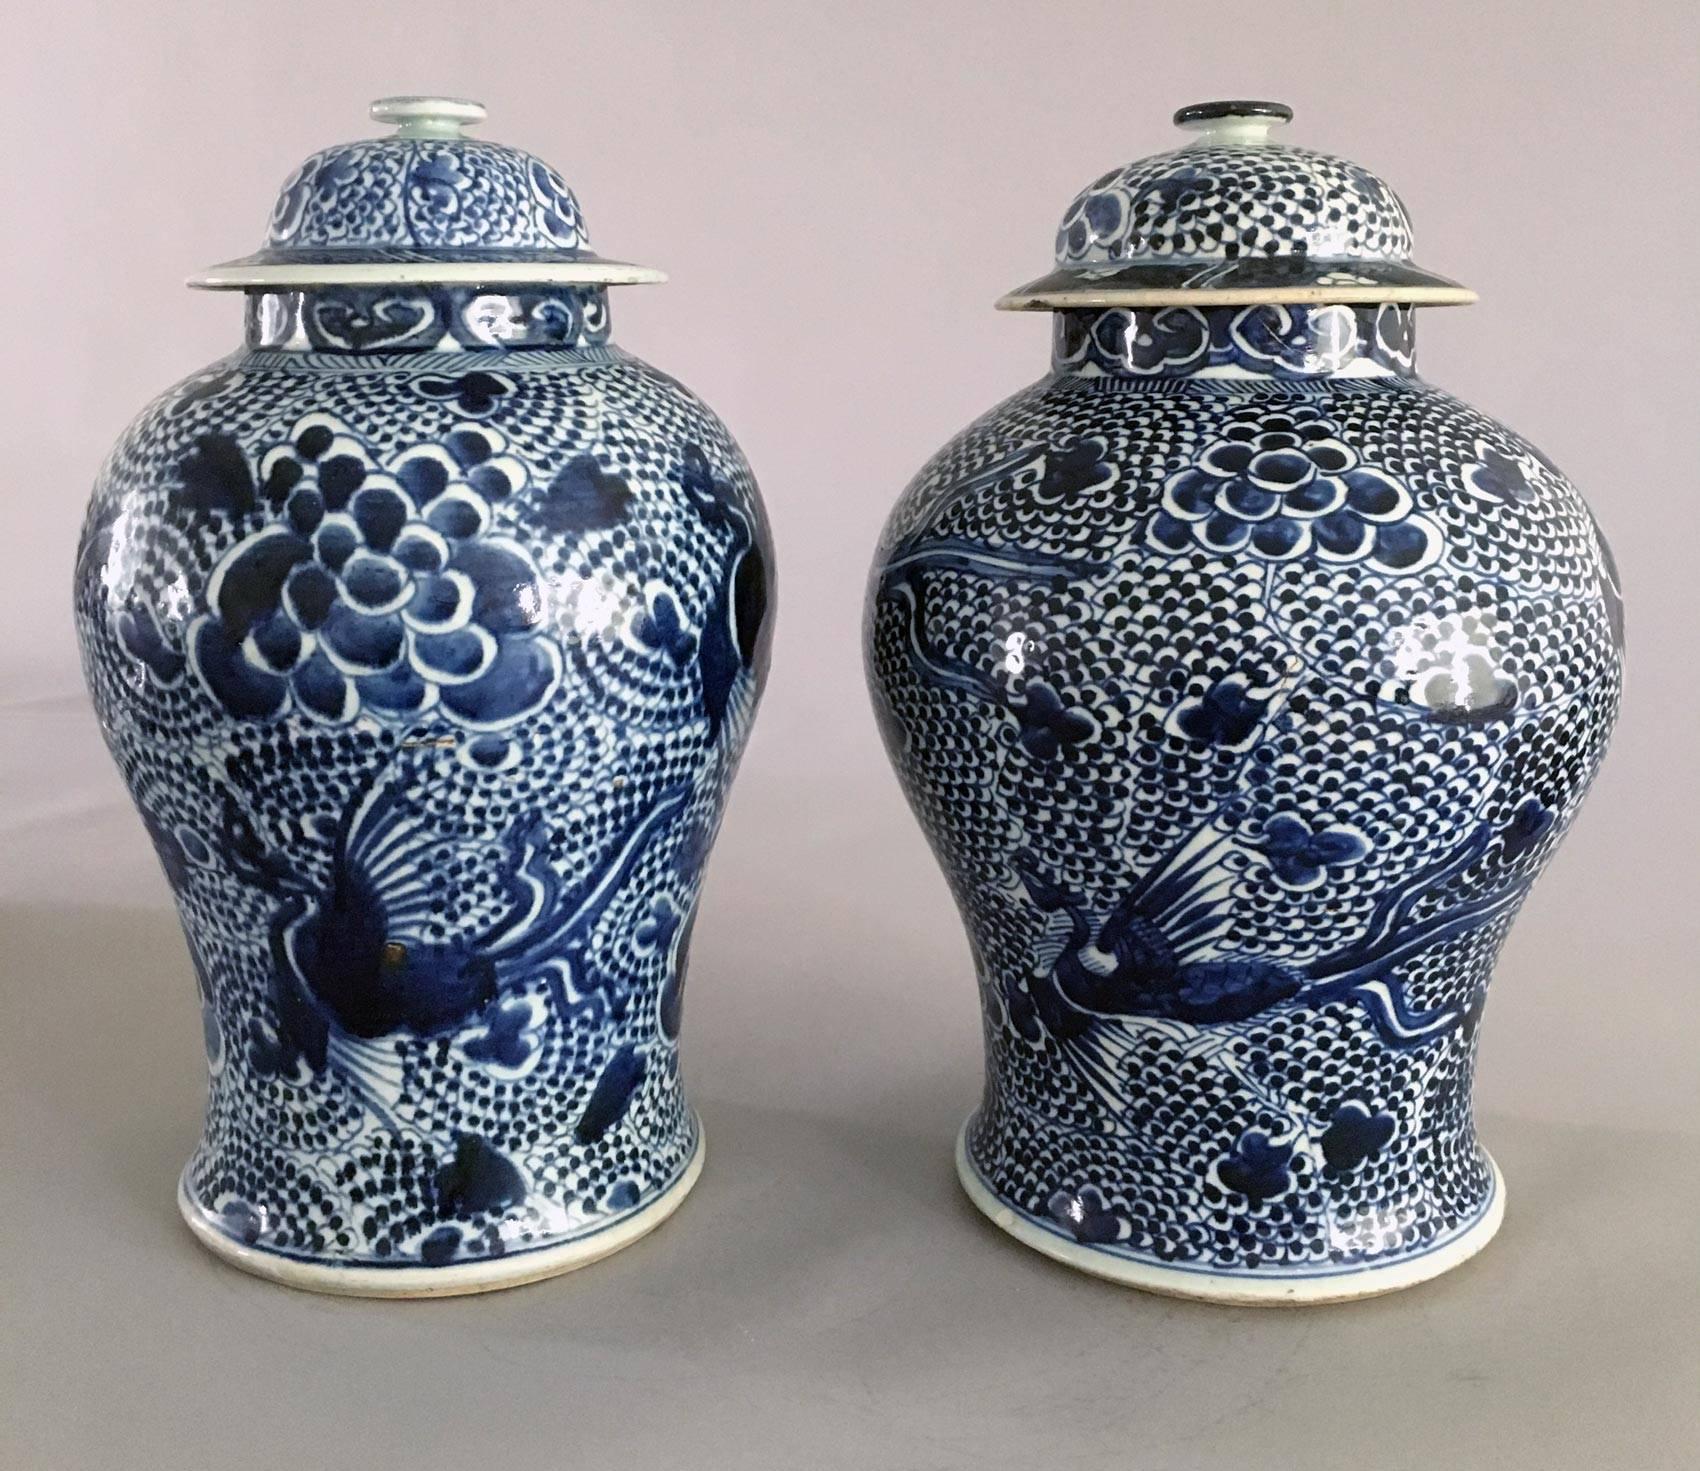 Chinese matched pair of porcelain blue and white vases and covers, decorated with flying phoenix birds on a background of deep cobalt clouds and swirling dots.